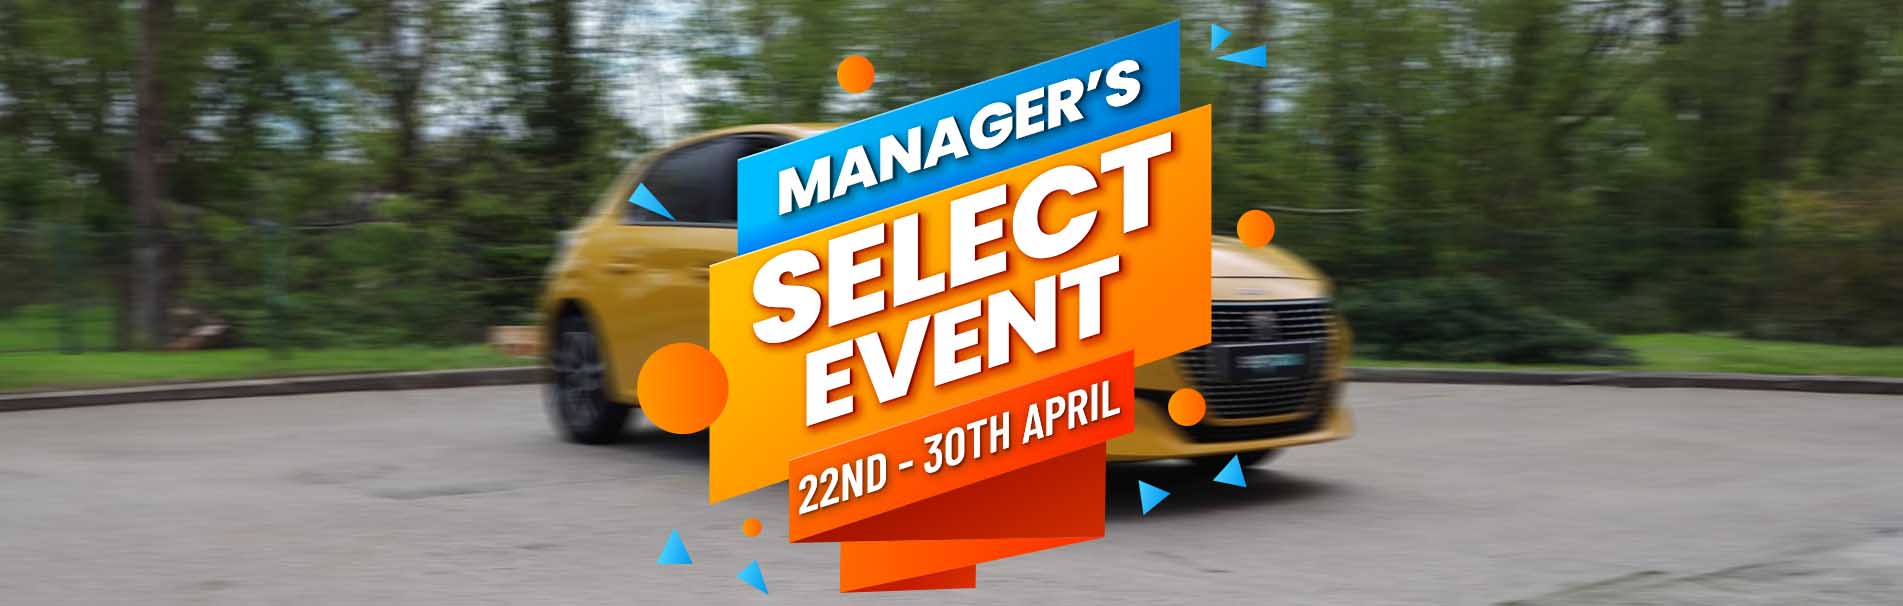 charters-of-aldershot-managers-select-event-april-used-cars-sli